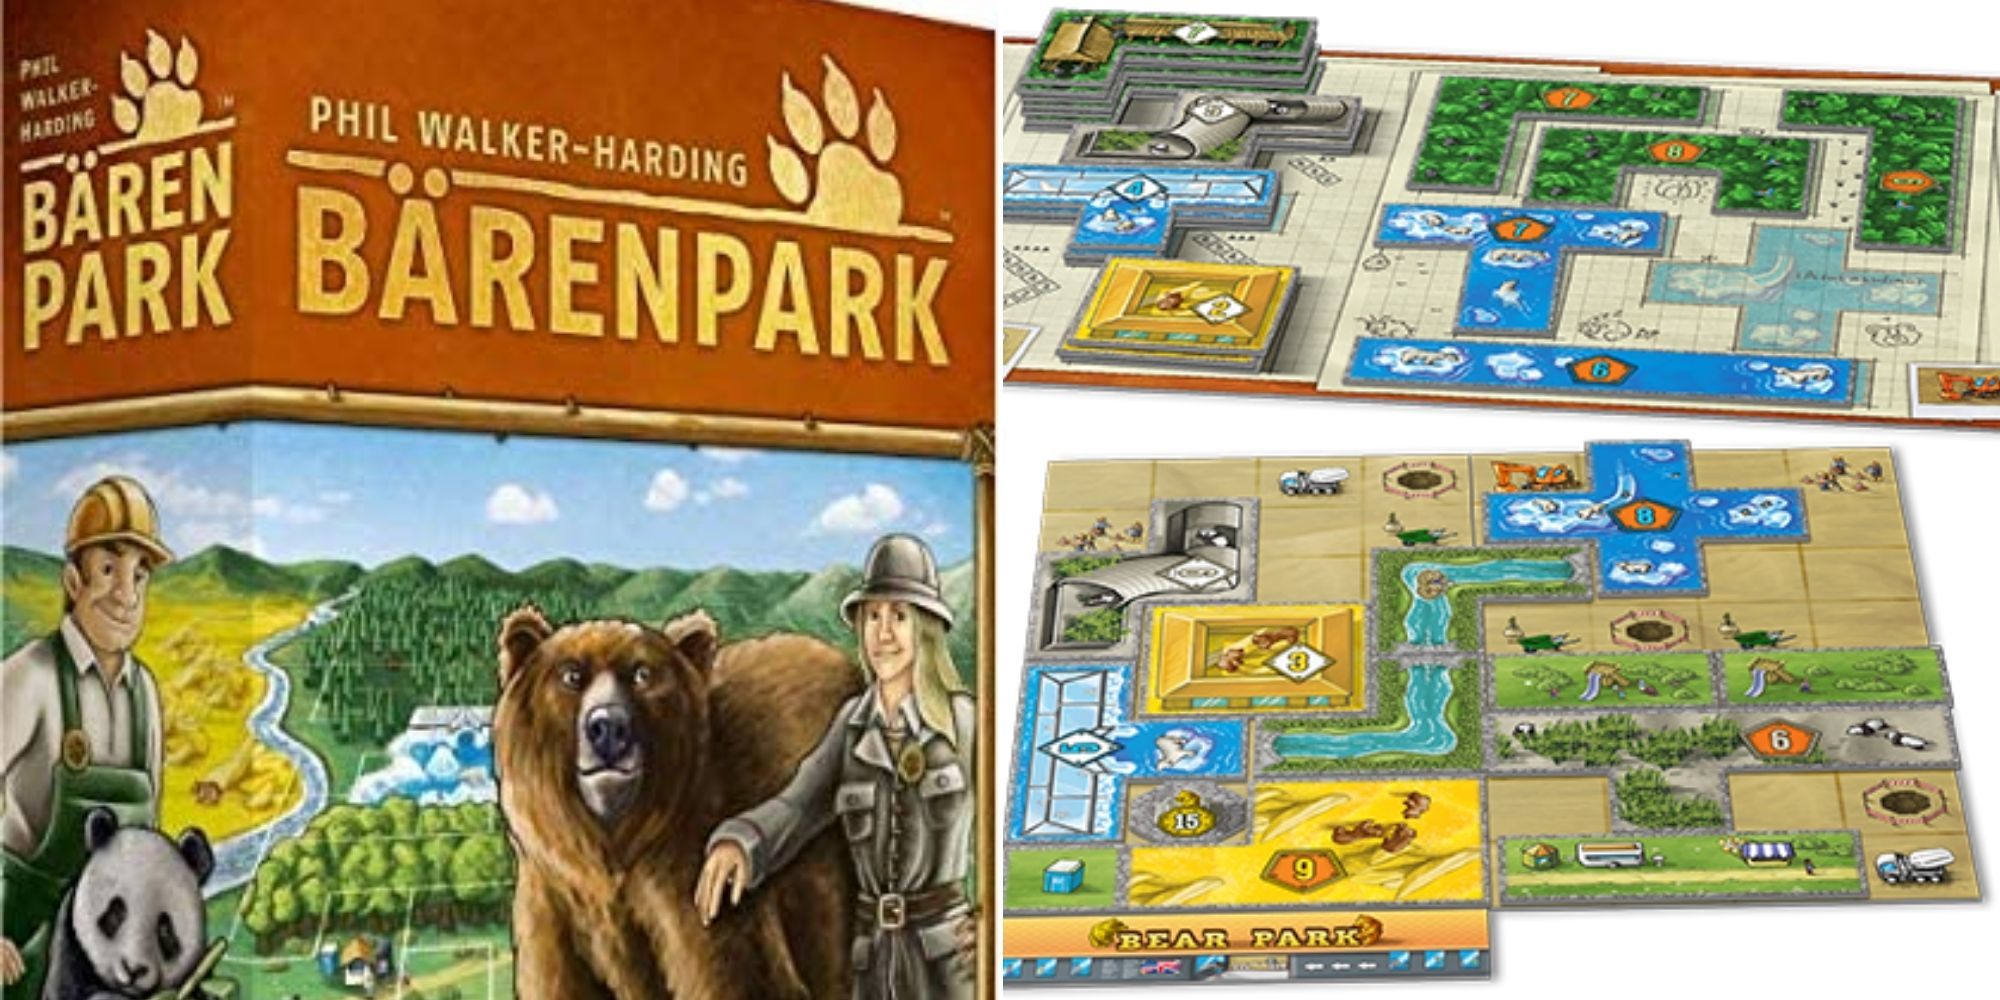 Baren Park Board Game Box - A player's park and the available pieces to collect